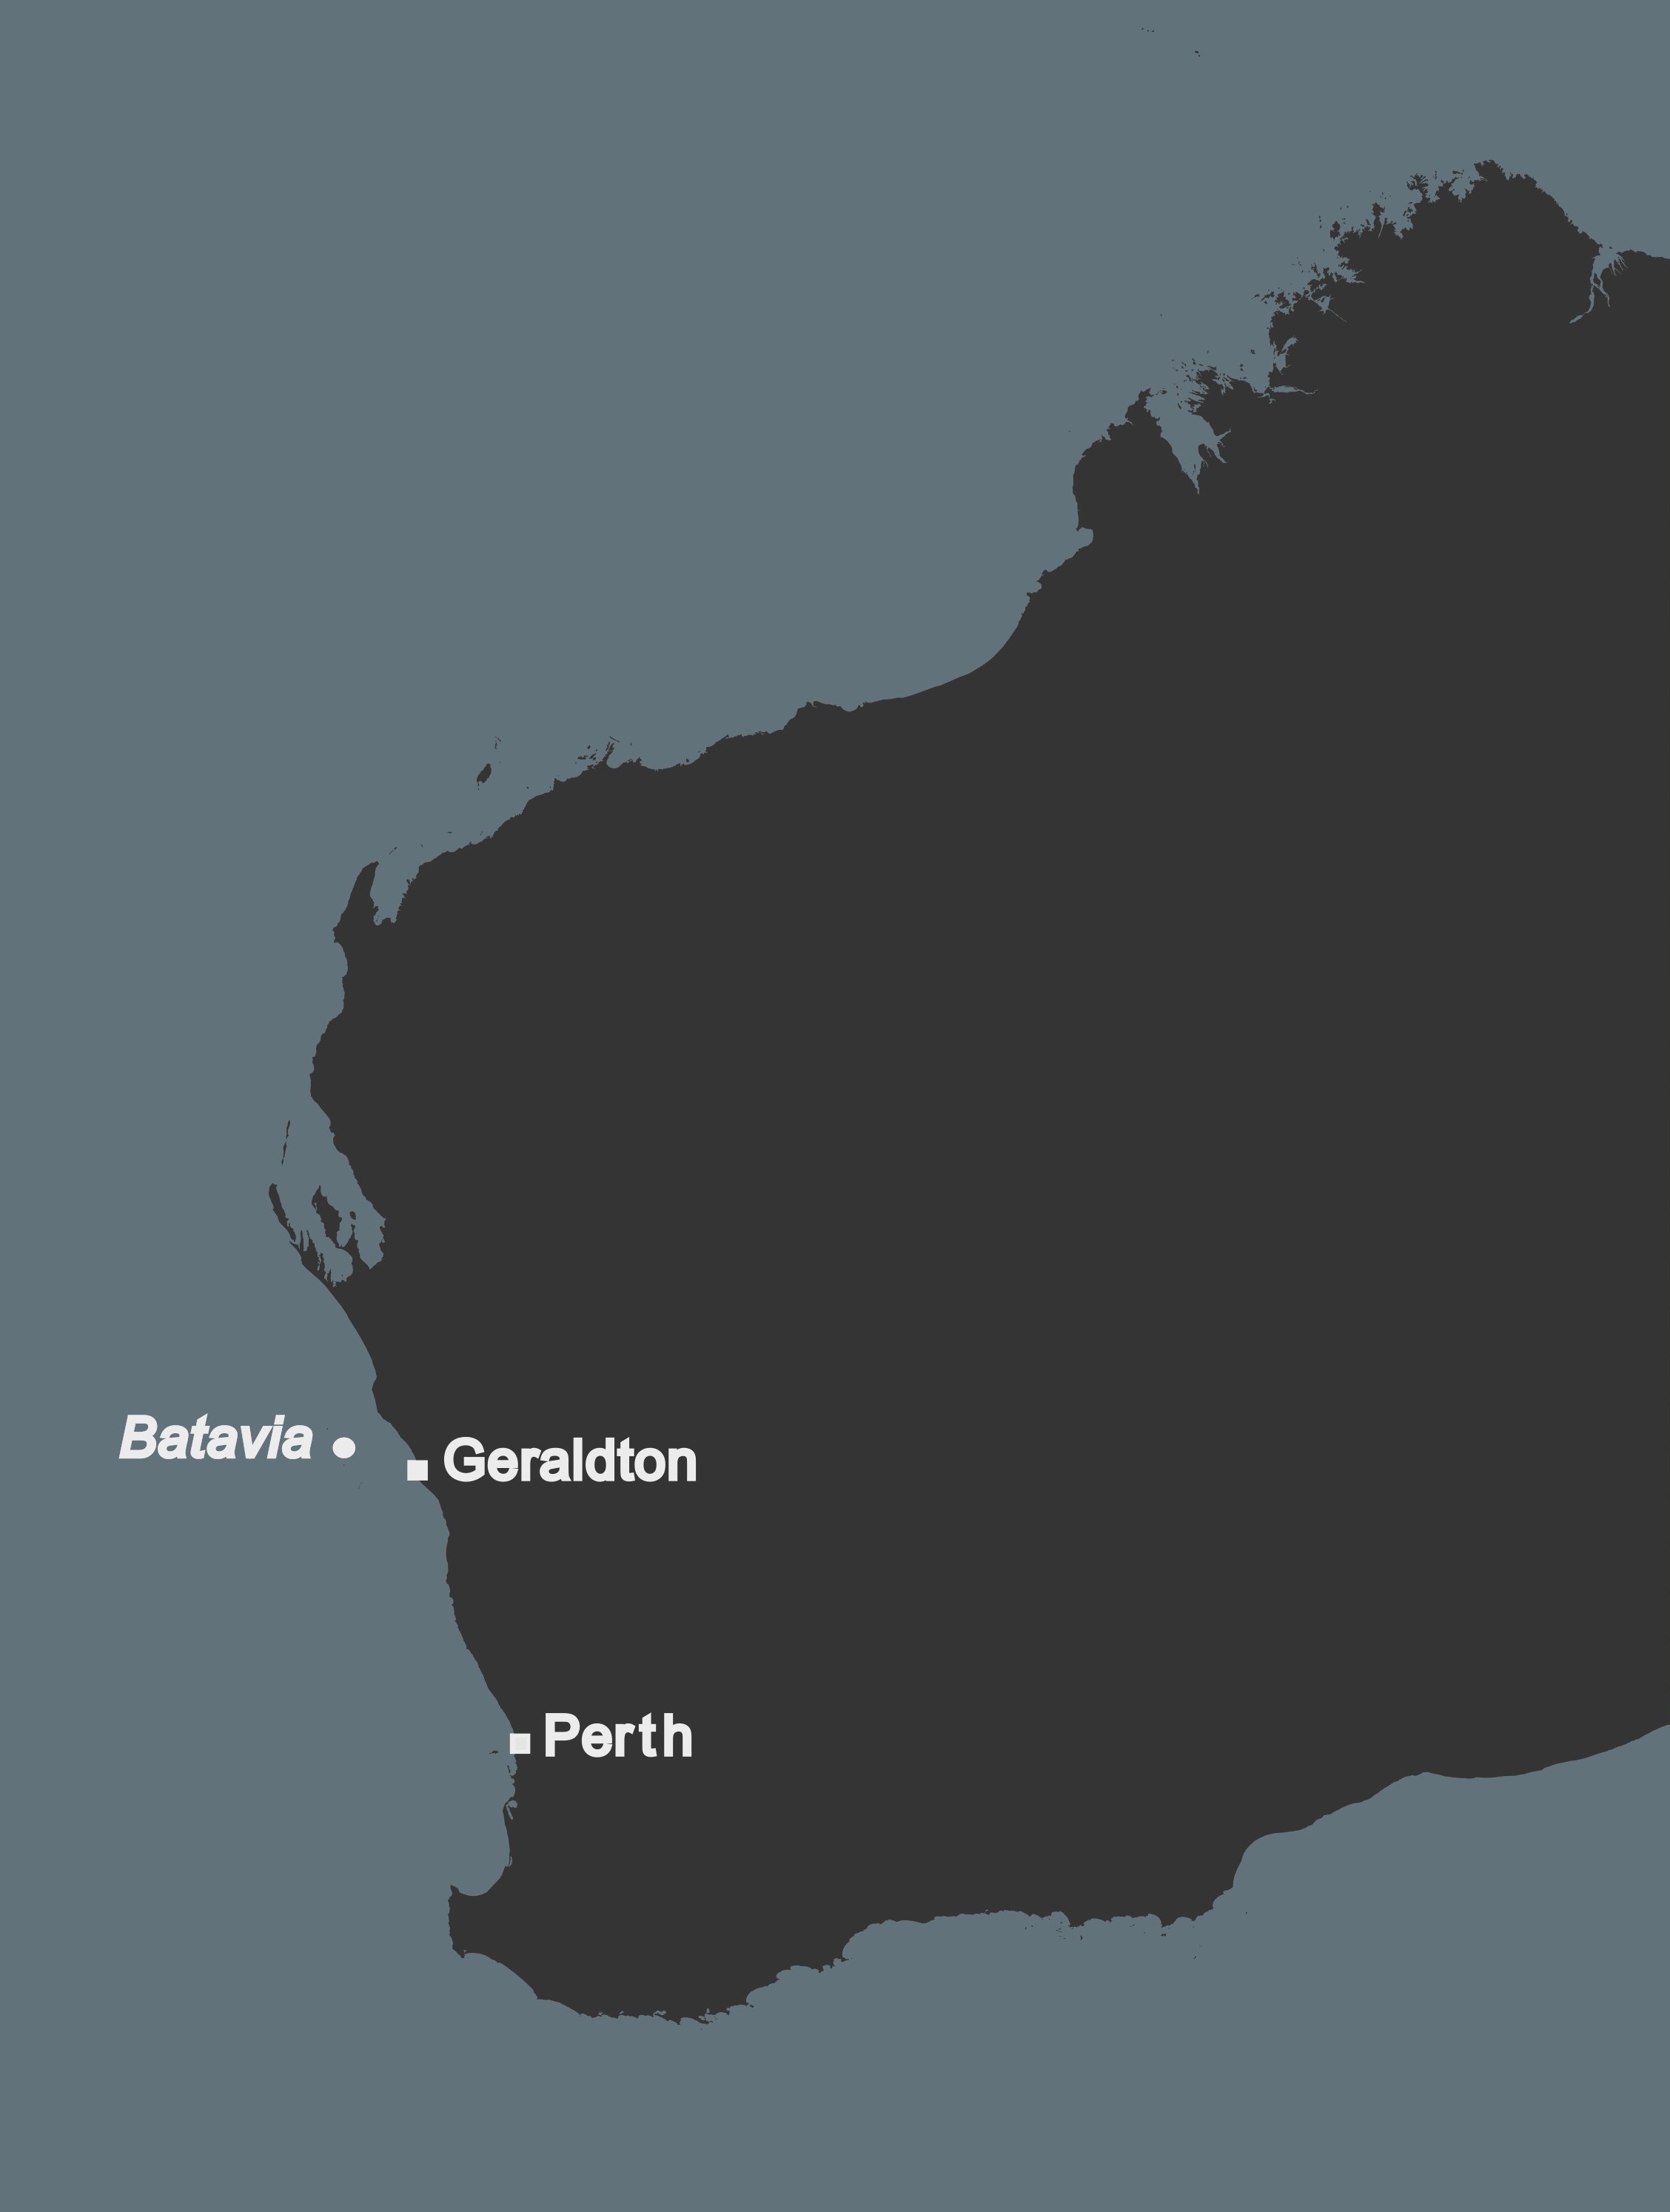 Western Australia with Perth marked in the south and Geraldton and the Batavia wreck site in the mid-west.